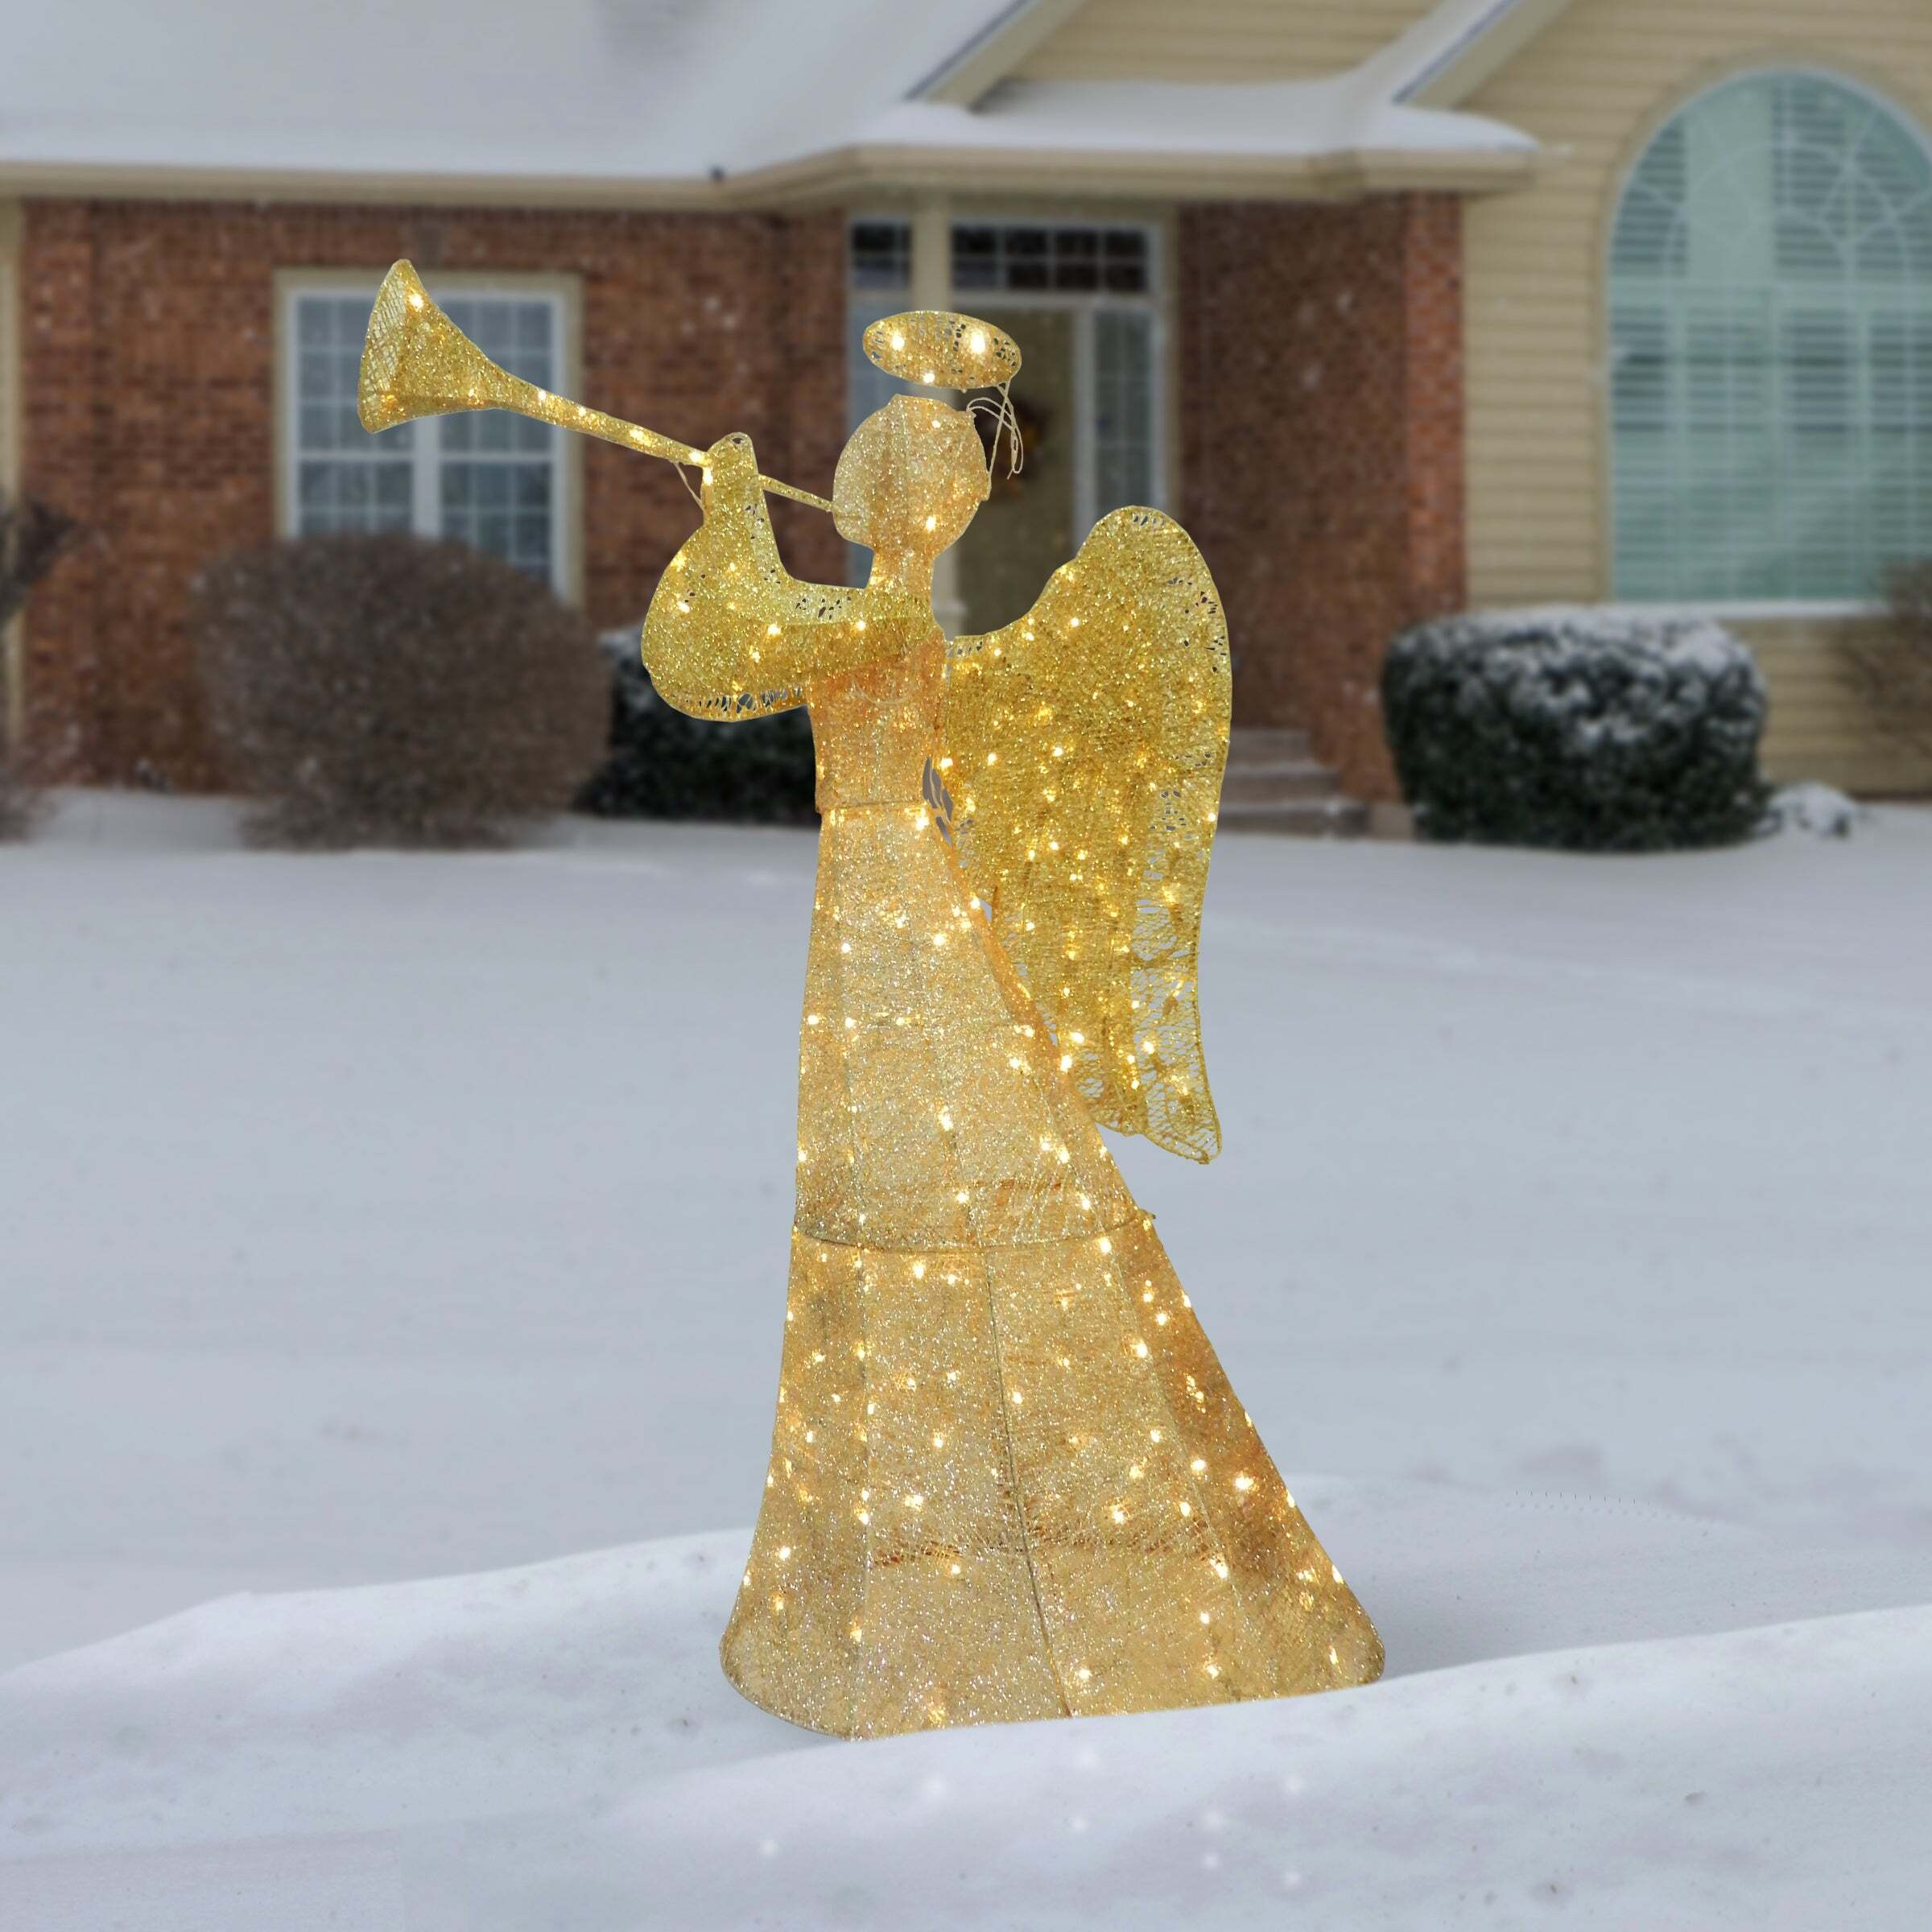 60in. Angel Decoration with LED Lights